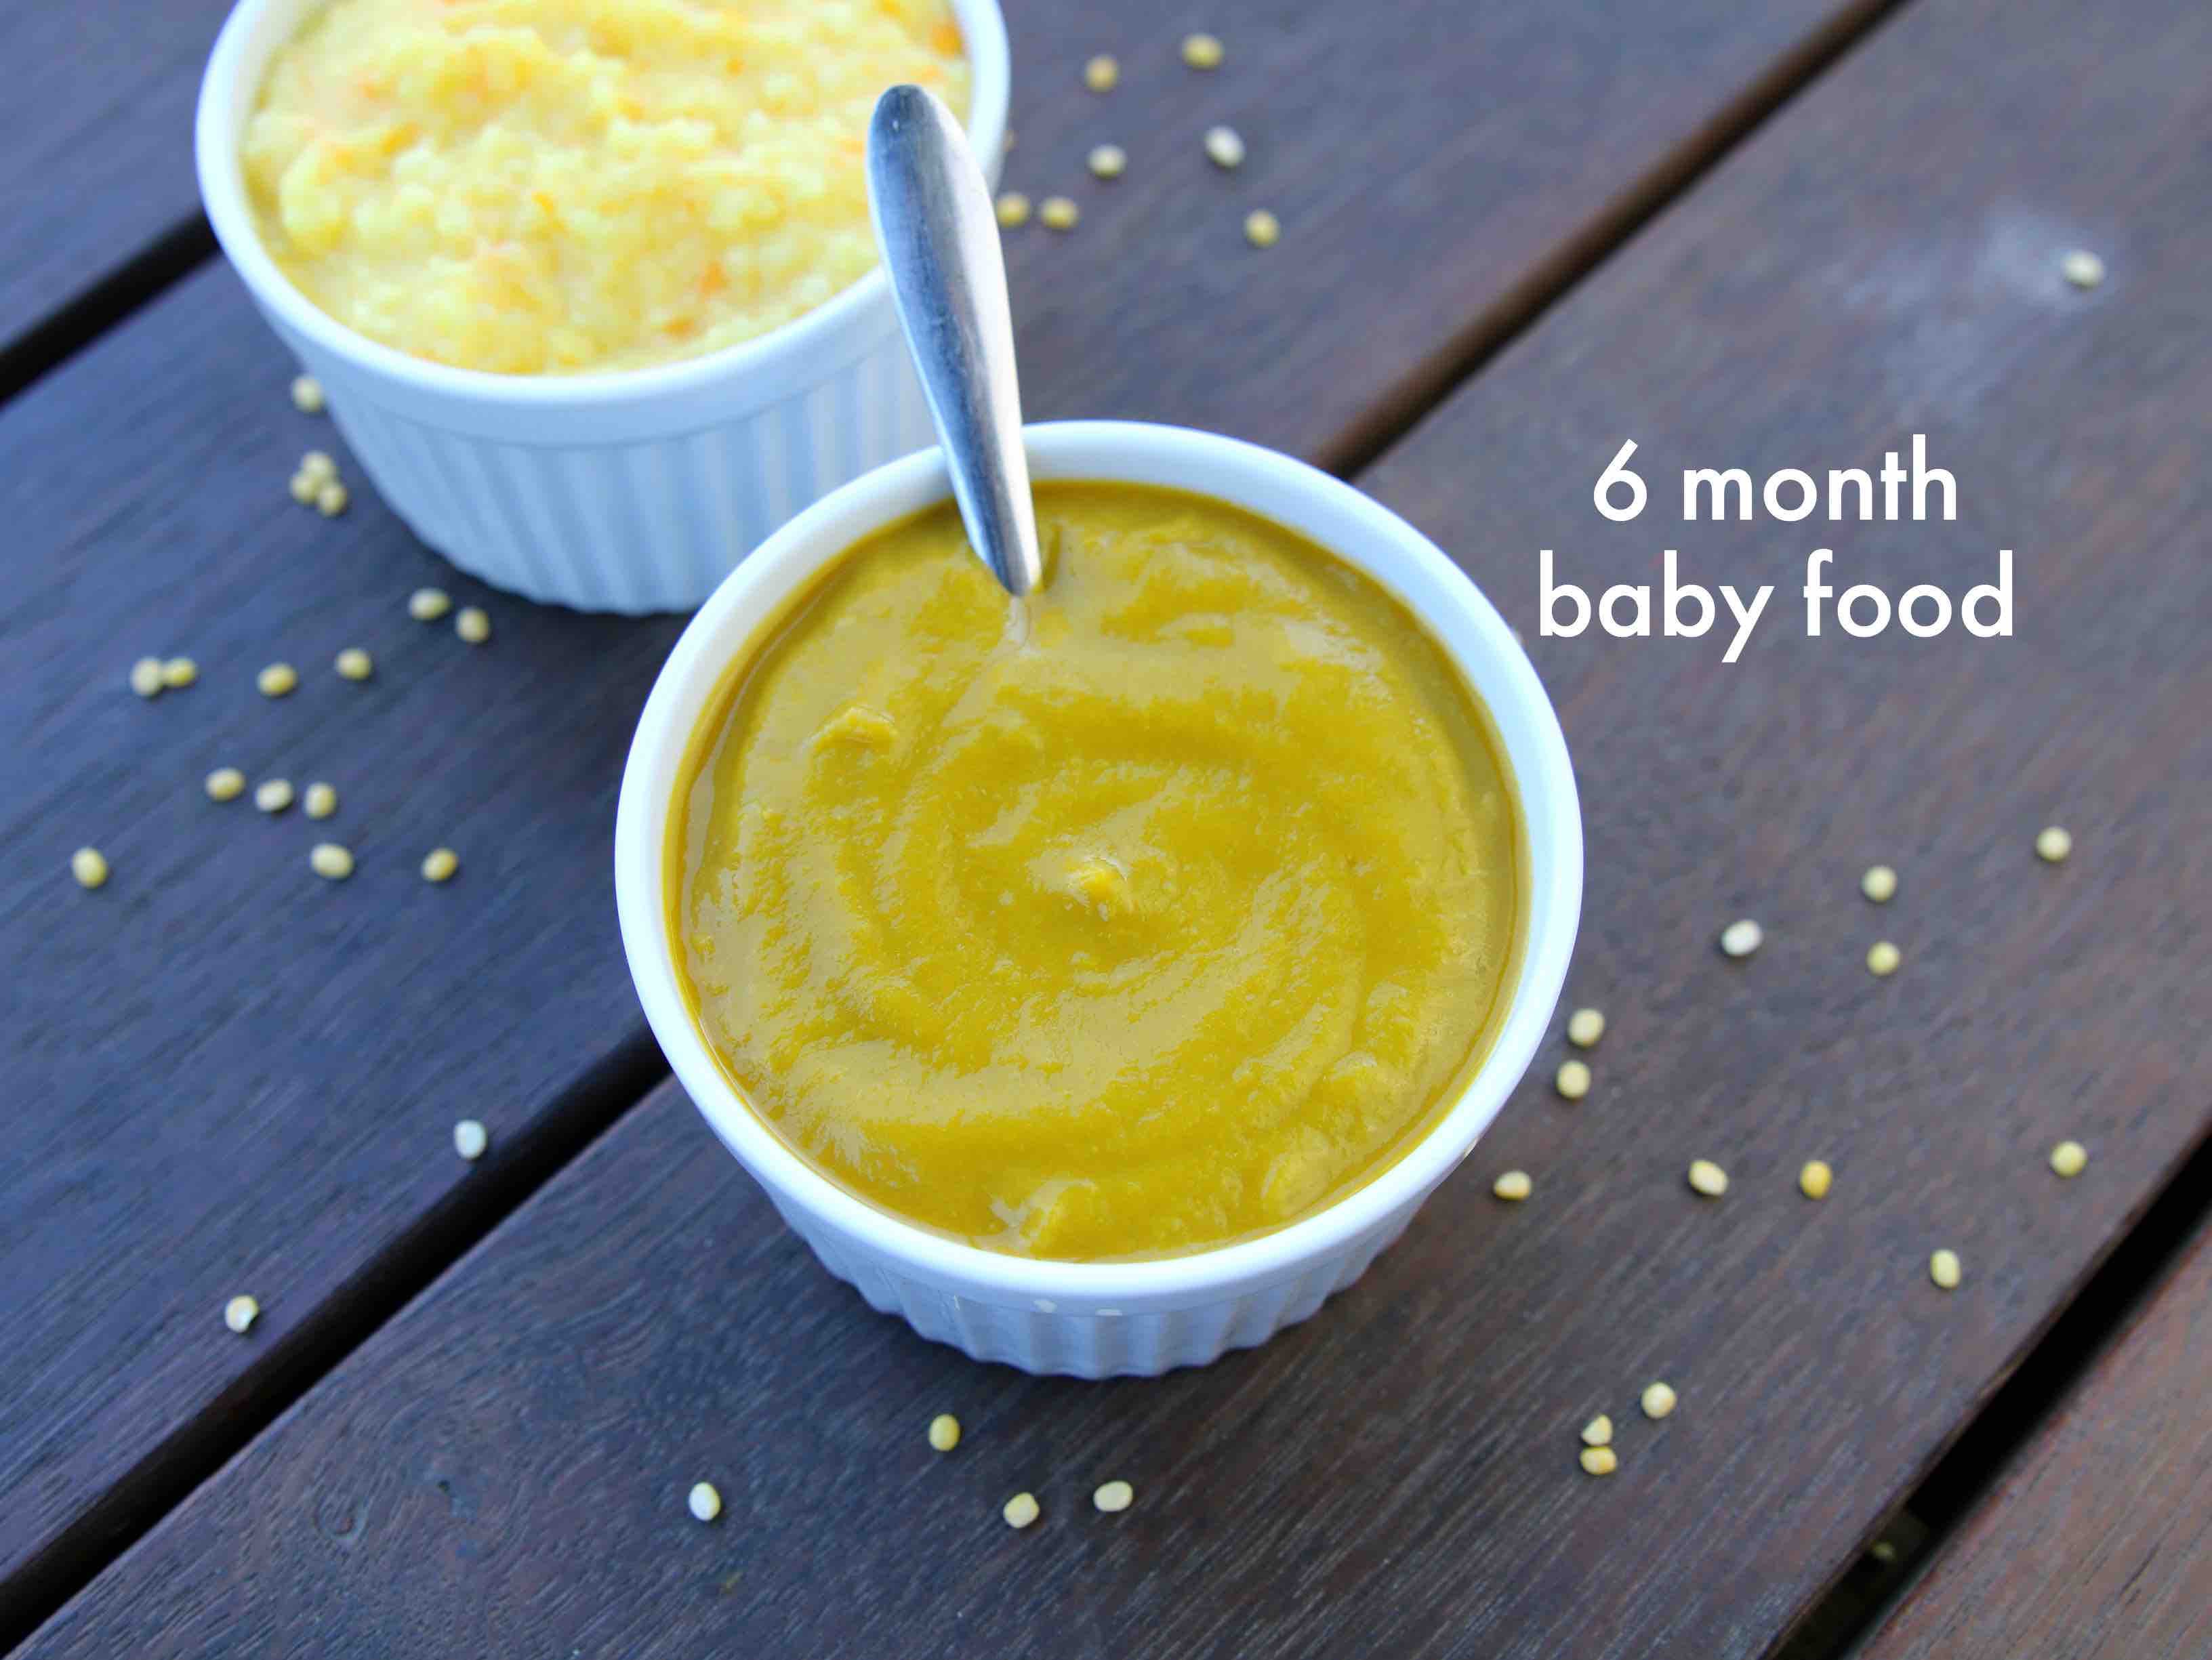 Baby Food After Months | vlr.eng.br